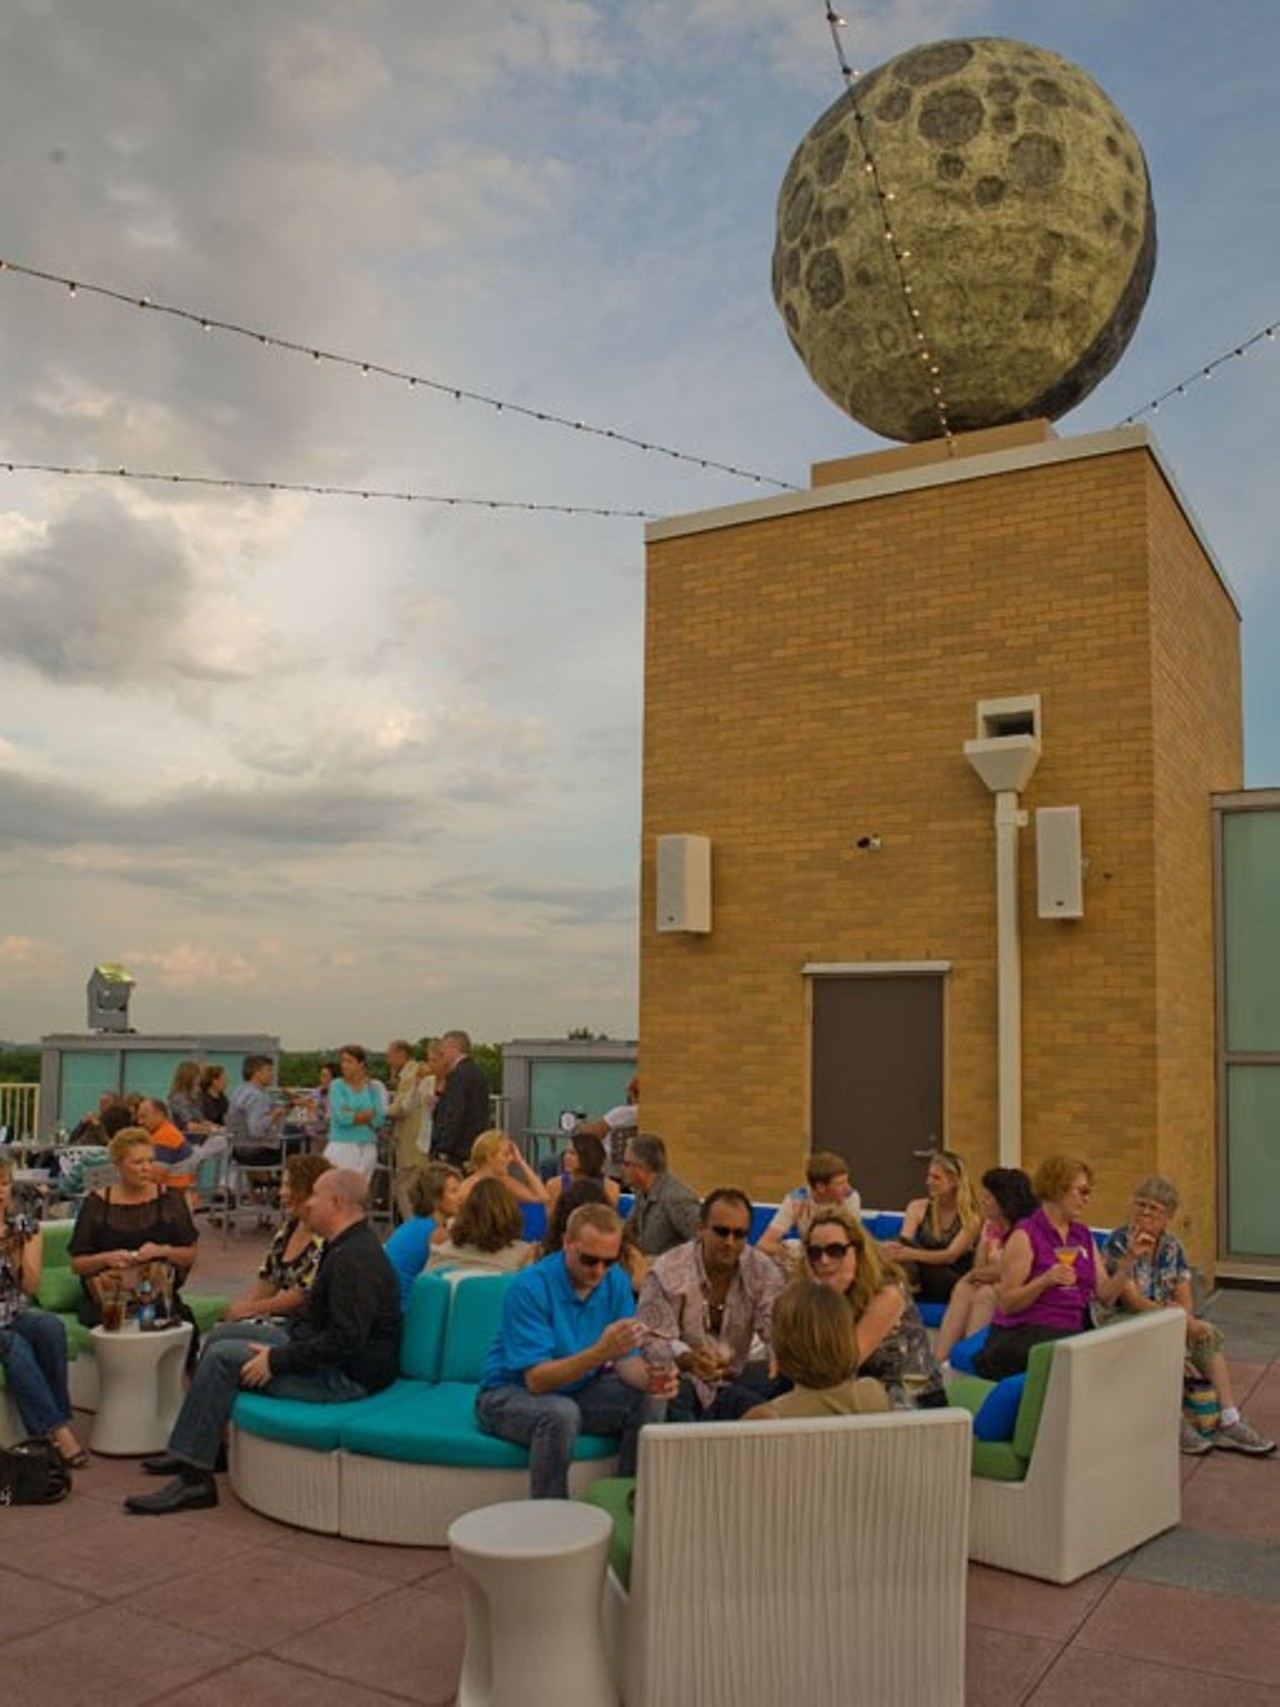 Eclipse at the Moonrise
6177 Delmar Boulevard
Moonrise in the Delmar Loop has a giant moon and a rooftop view of all the going-ons. You'll feel like you're in the clouds.